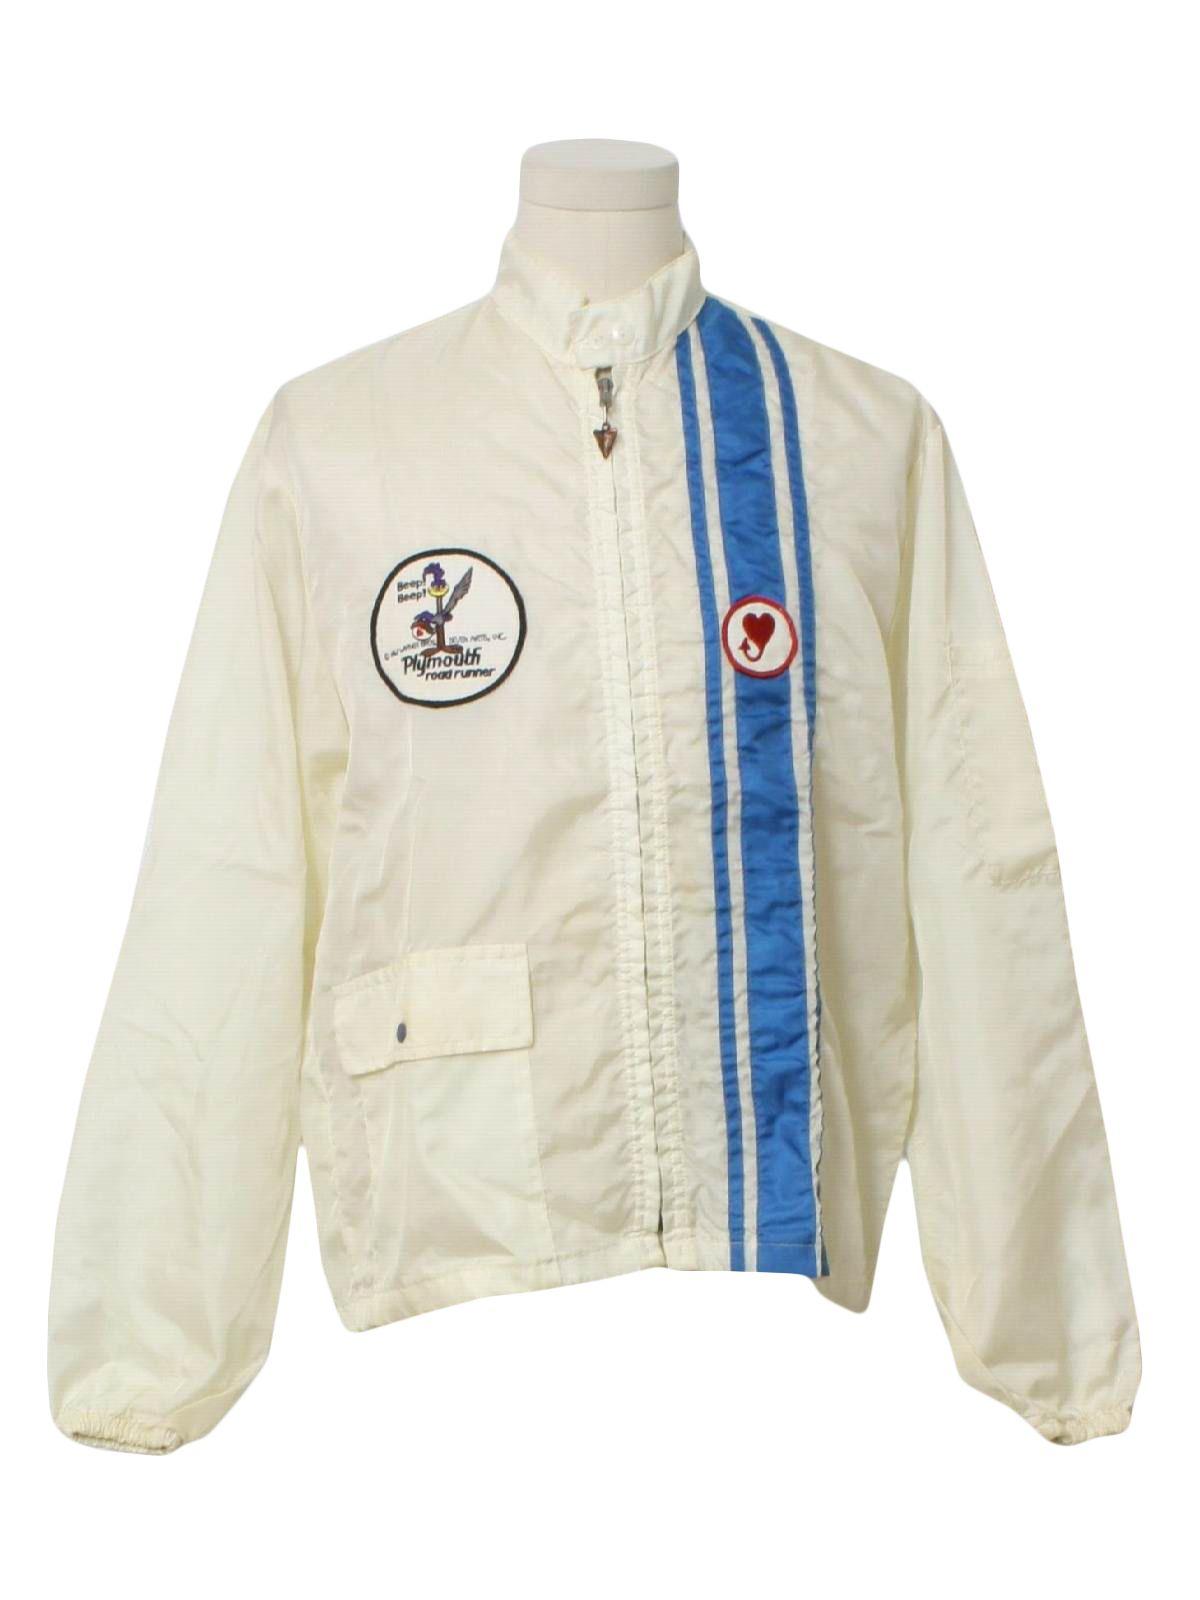 Plymouth Heart Logo - 60s Vintage Jacket: 60s -no label- Mens ivory background and blue